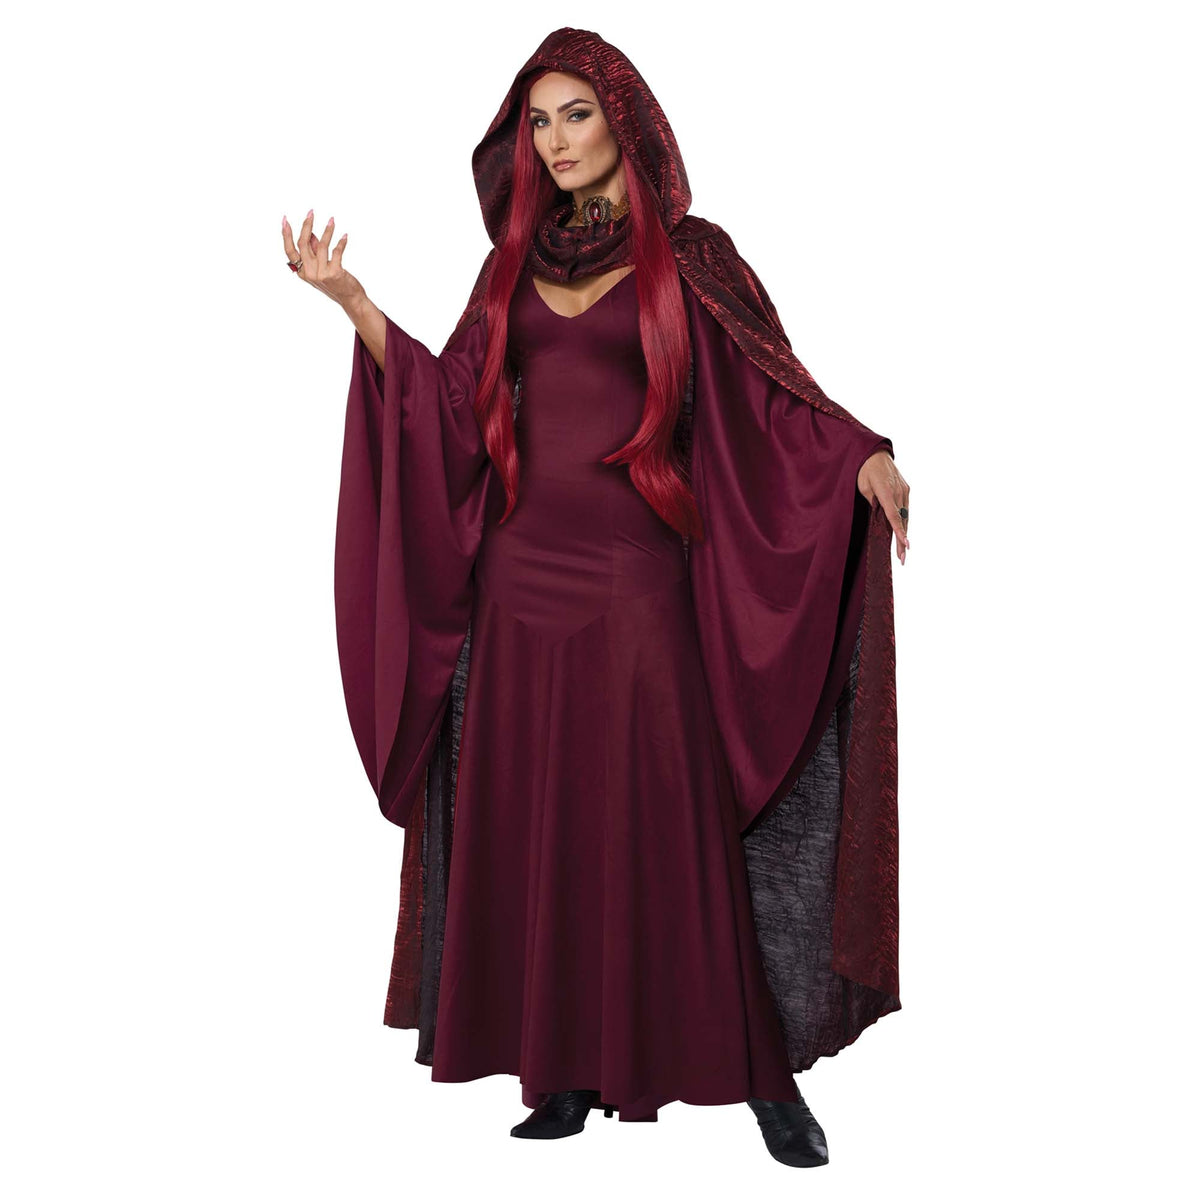 CALIFORNIA COSTUMES Costumes The Red Witch Costume for Adults, Red Dress